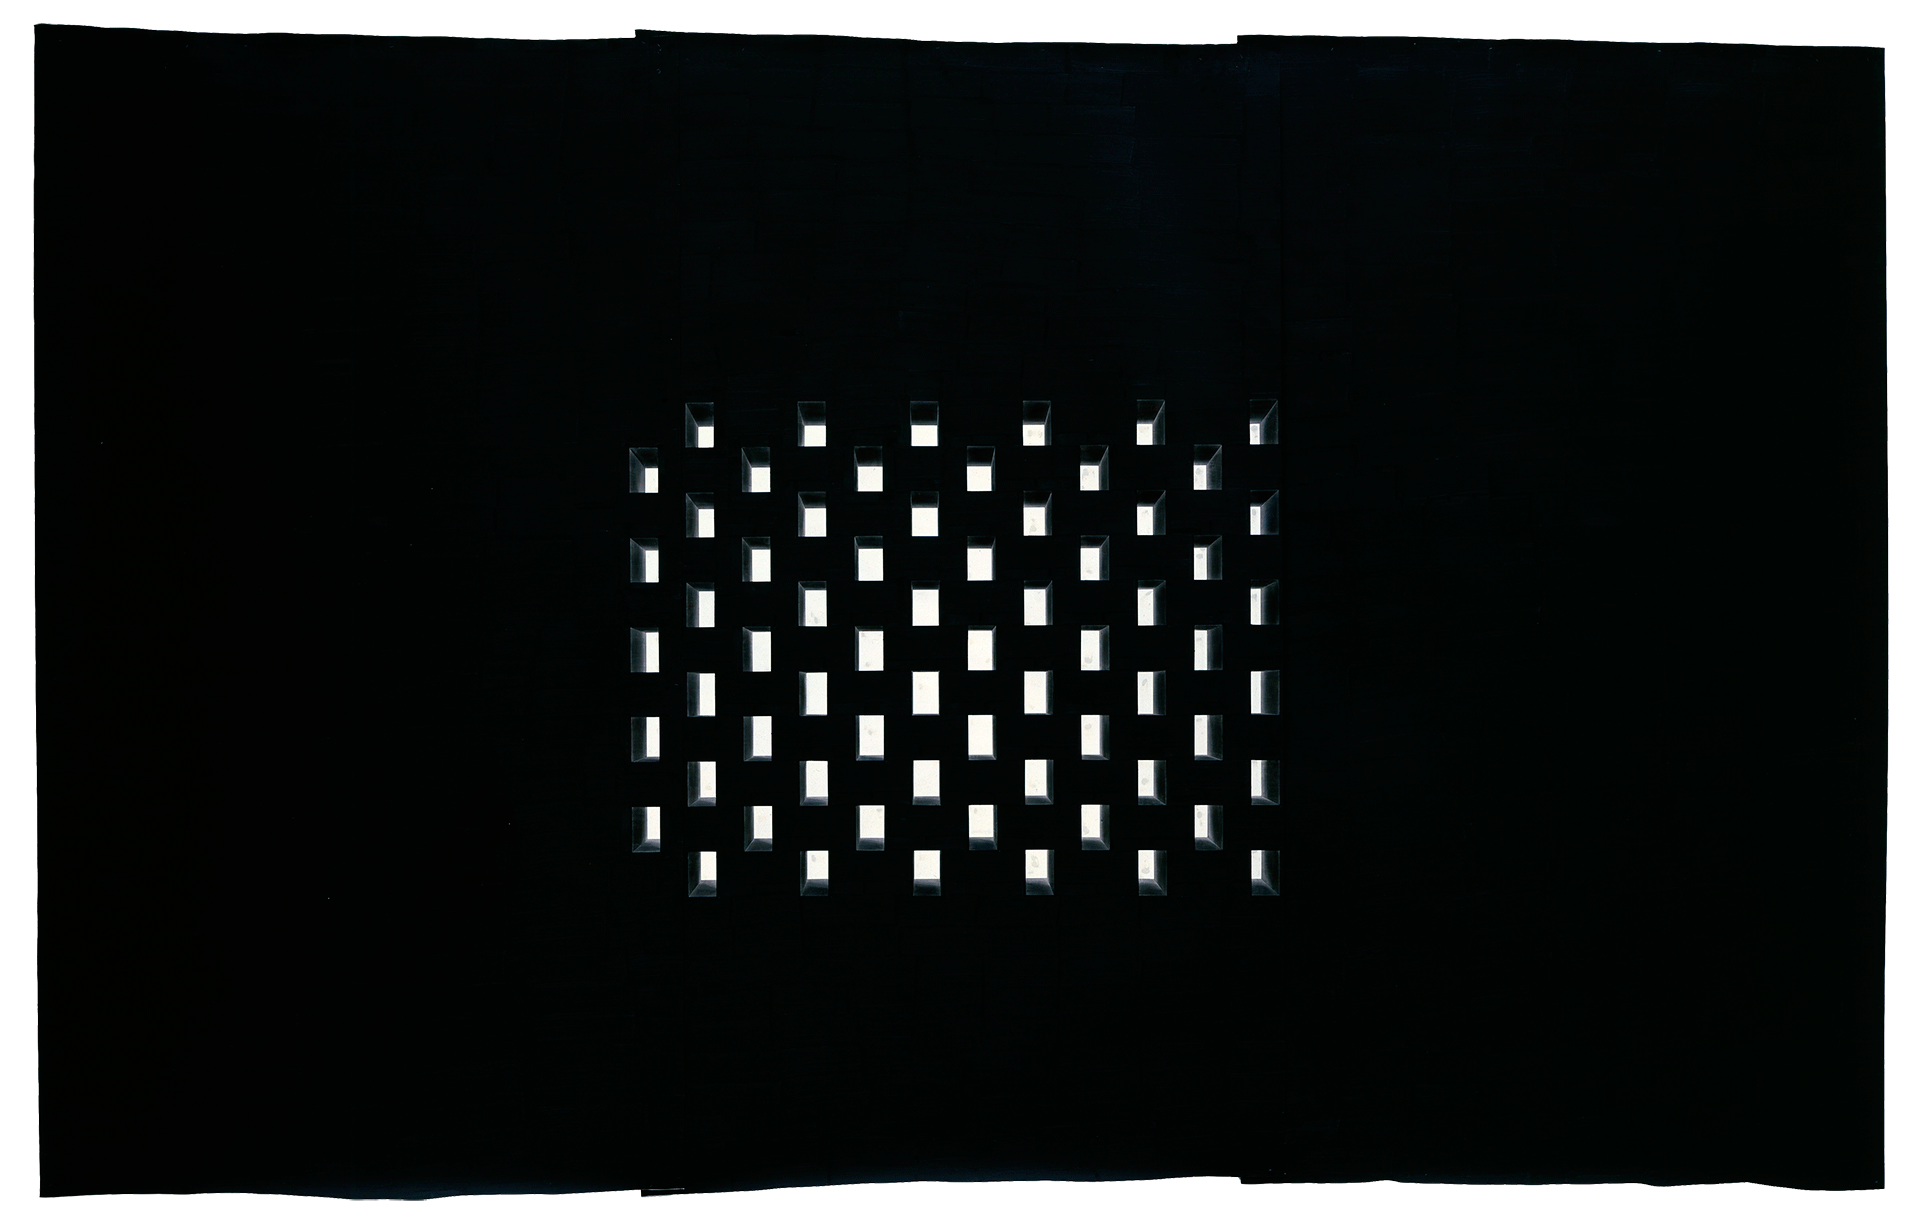 An encaustic wax and oil work on paper by Toba Khedoori, titled Untitled (Dark Windows), dated 2006.